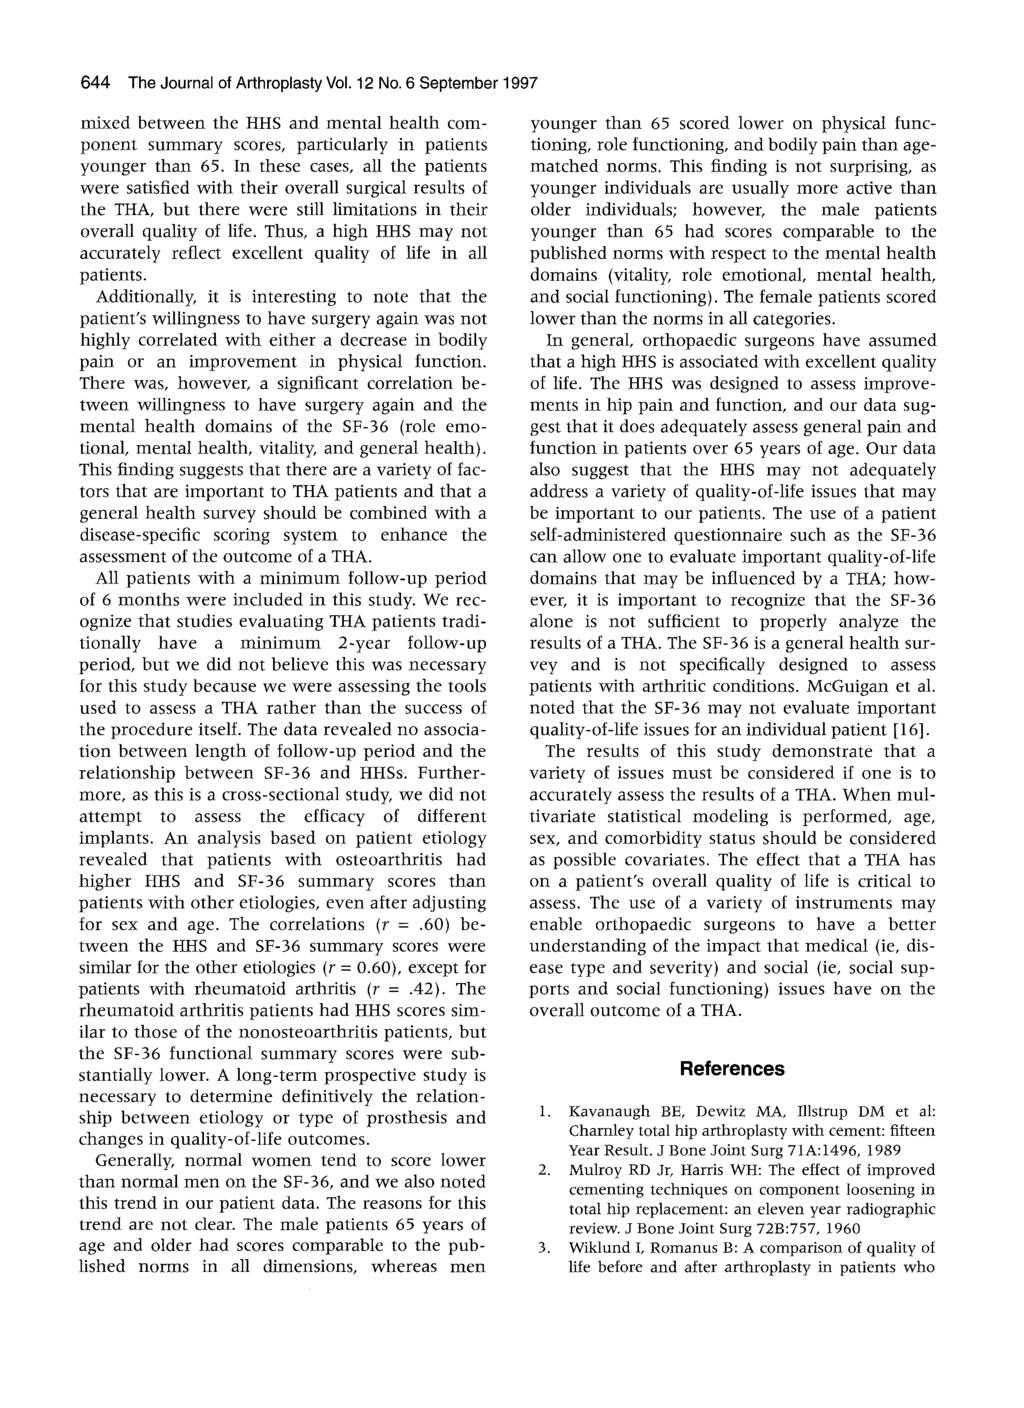 644 The Journal of Arthroplasty Vol. 12 No. 6 September 1997 mixed between the HHS and mental health component summary scores, particularly in patients younger than 65.